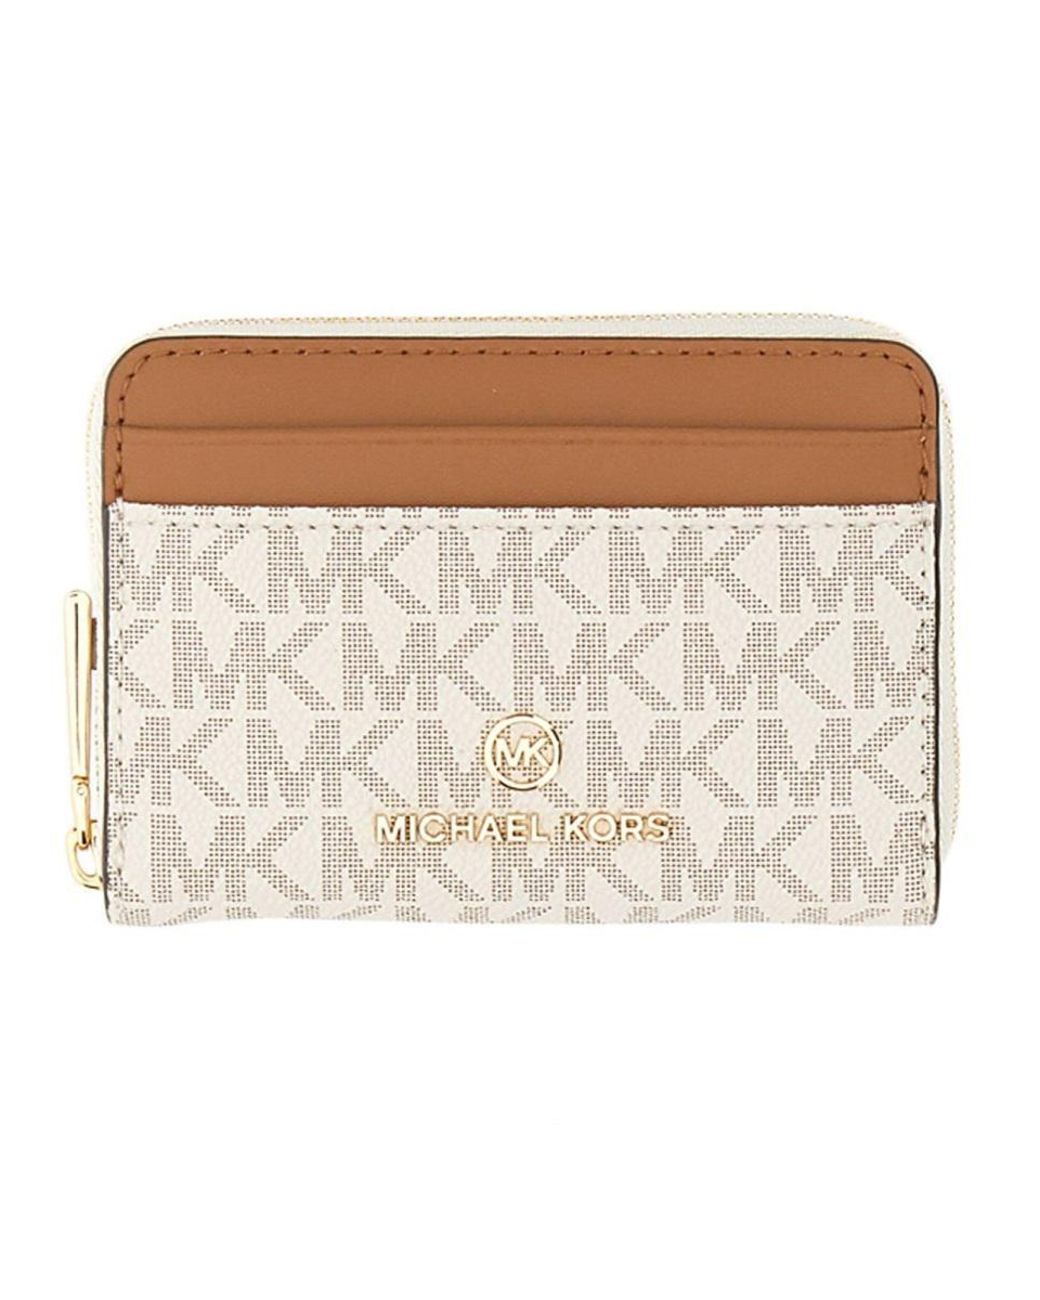 Michael Kors Canada Black Friday Preview Sale + 25% off Accessories for  KORSVIP Members - Canadian Freebies, Coupons, Deals, Bargains, Flyers,  Contests Canada Canadian Freebies, Coupons, Deals, Bargains, Flyers,  Contests Canada